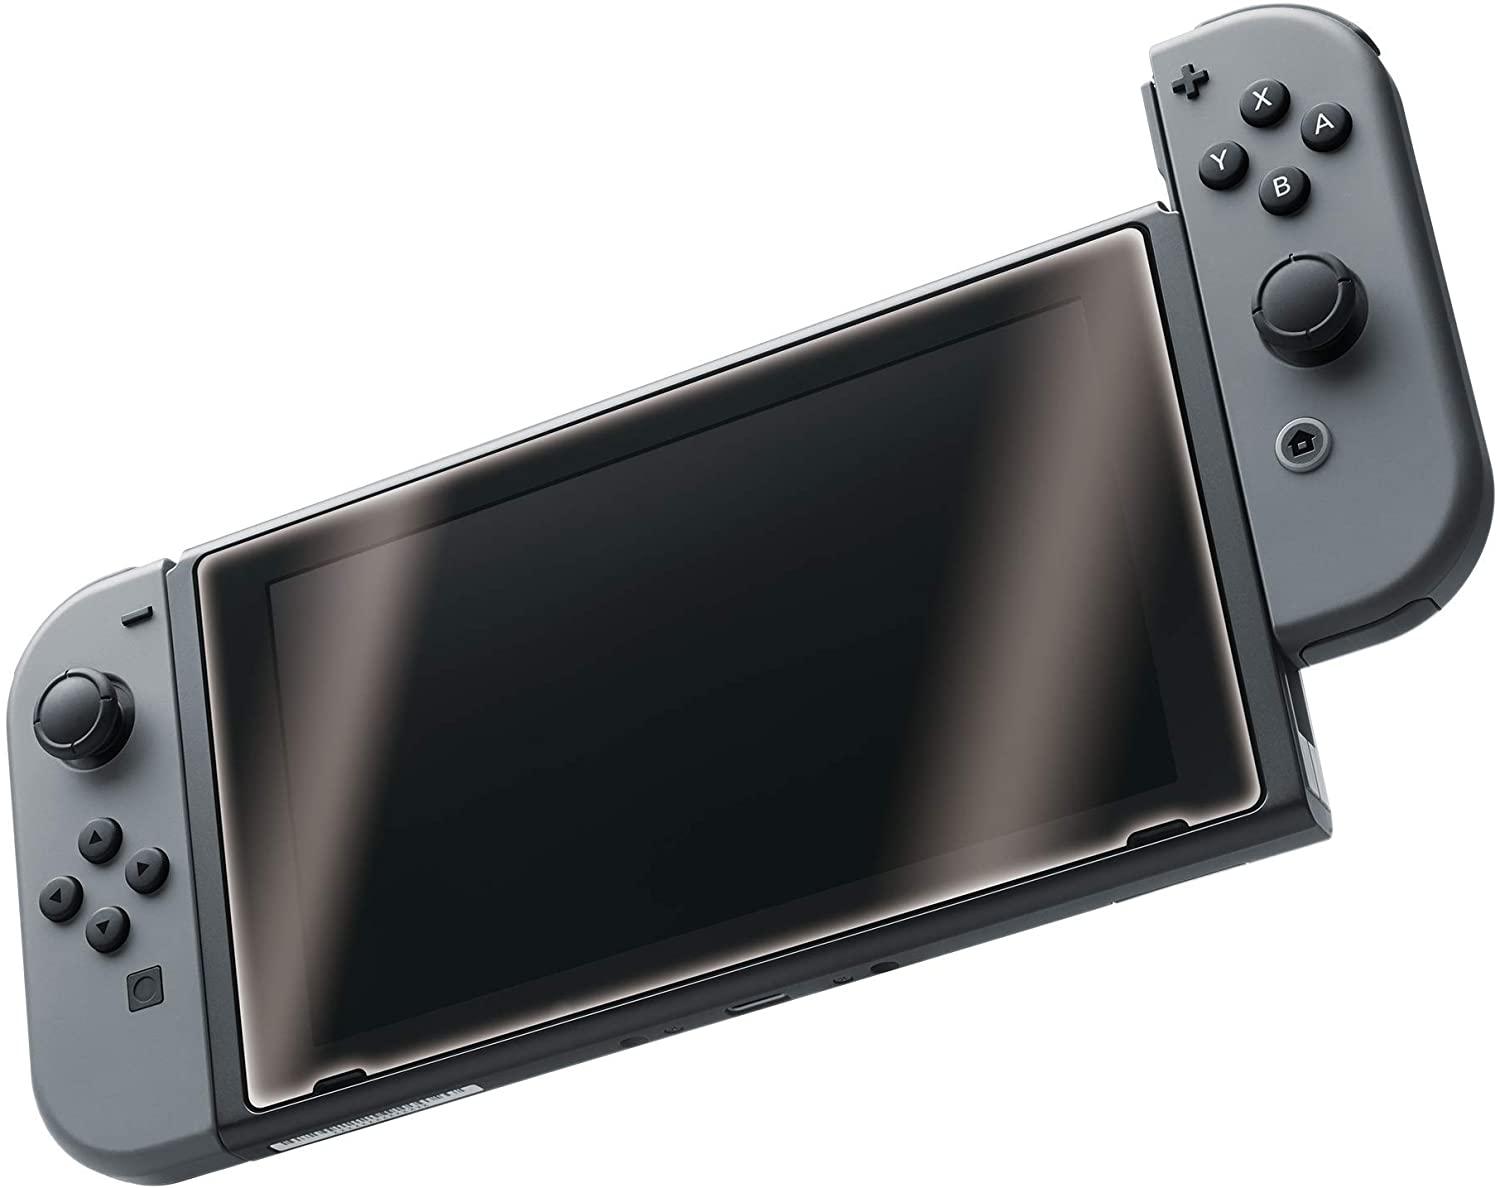 HORI Screen Protector for Nintendo Switch for $4.99